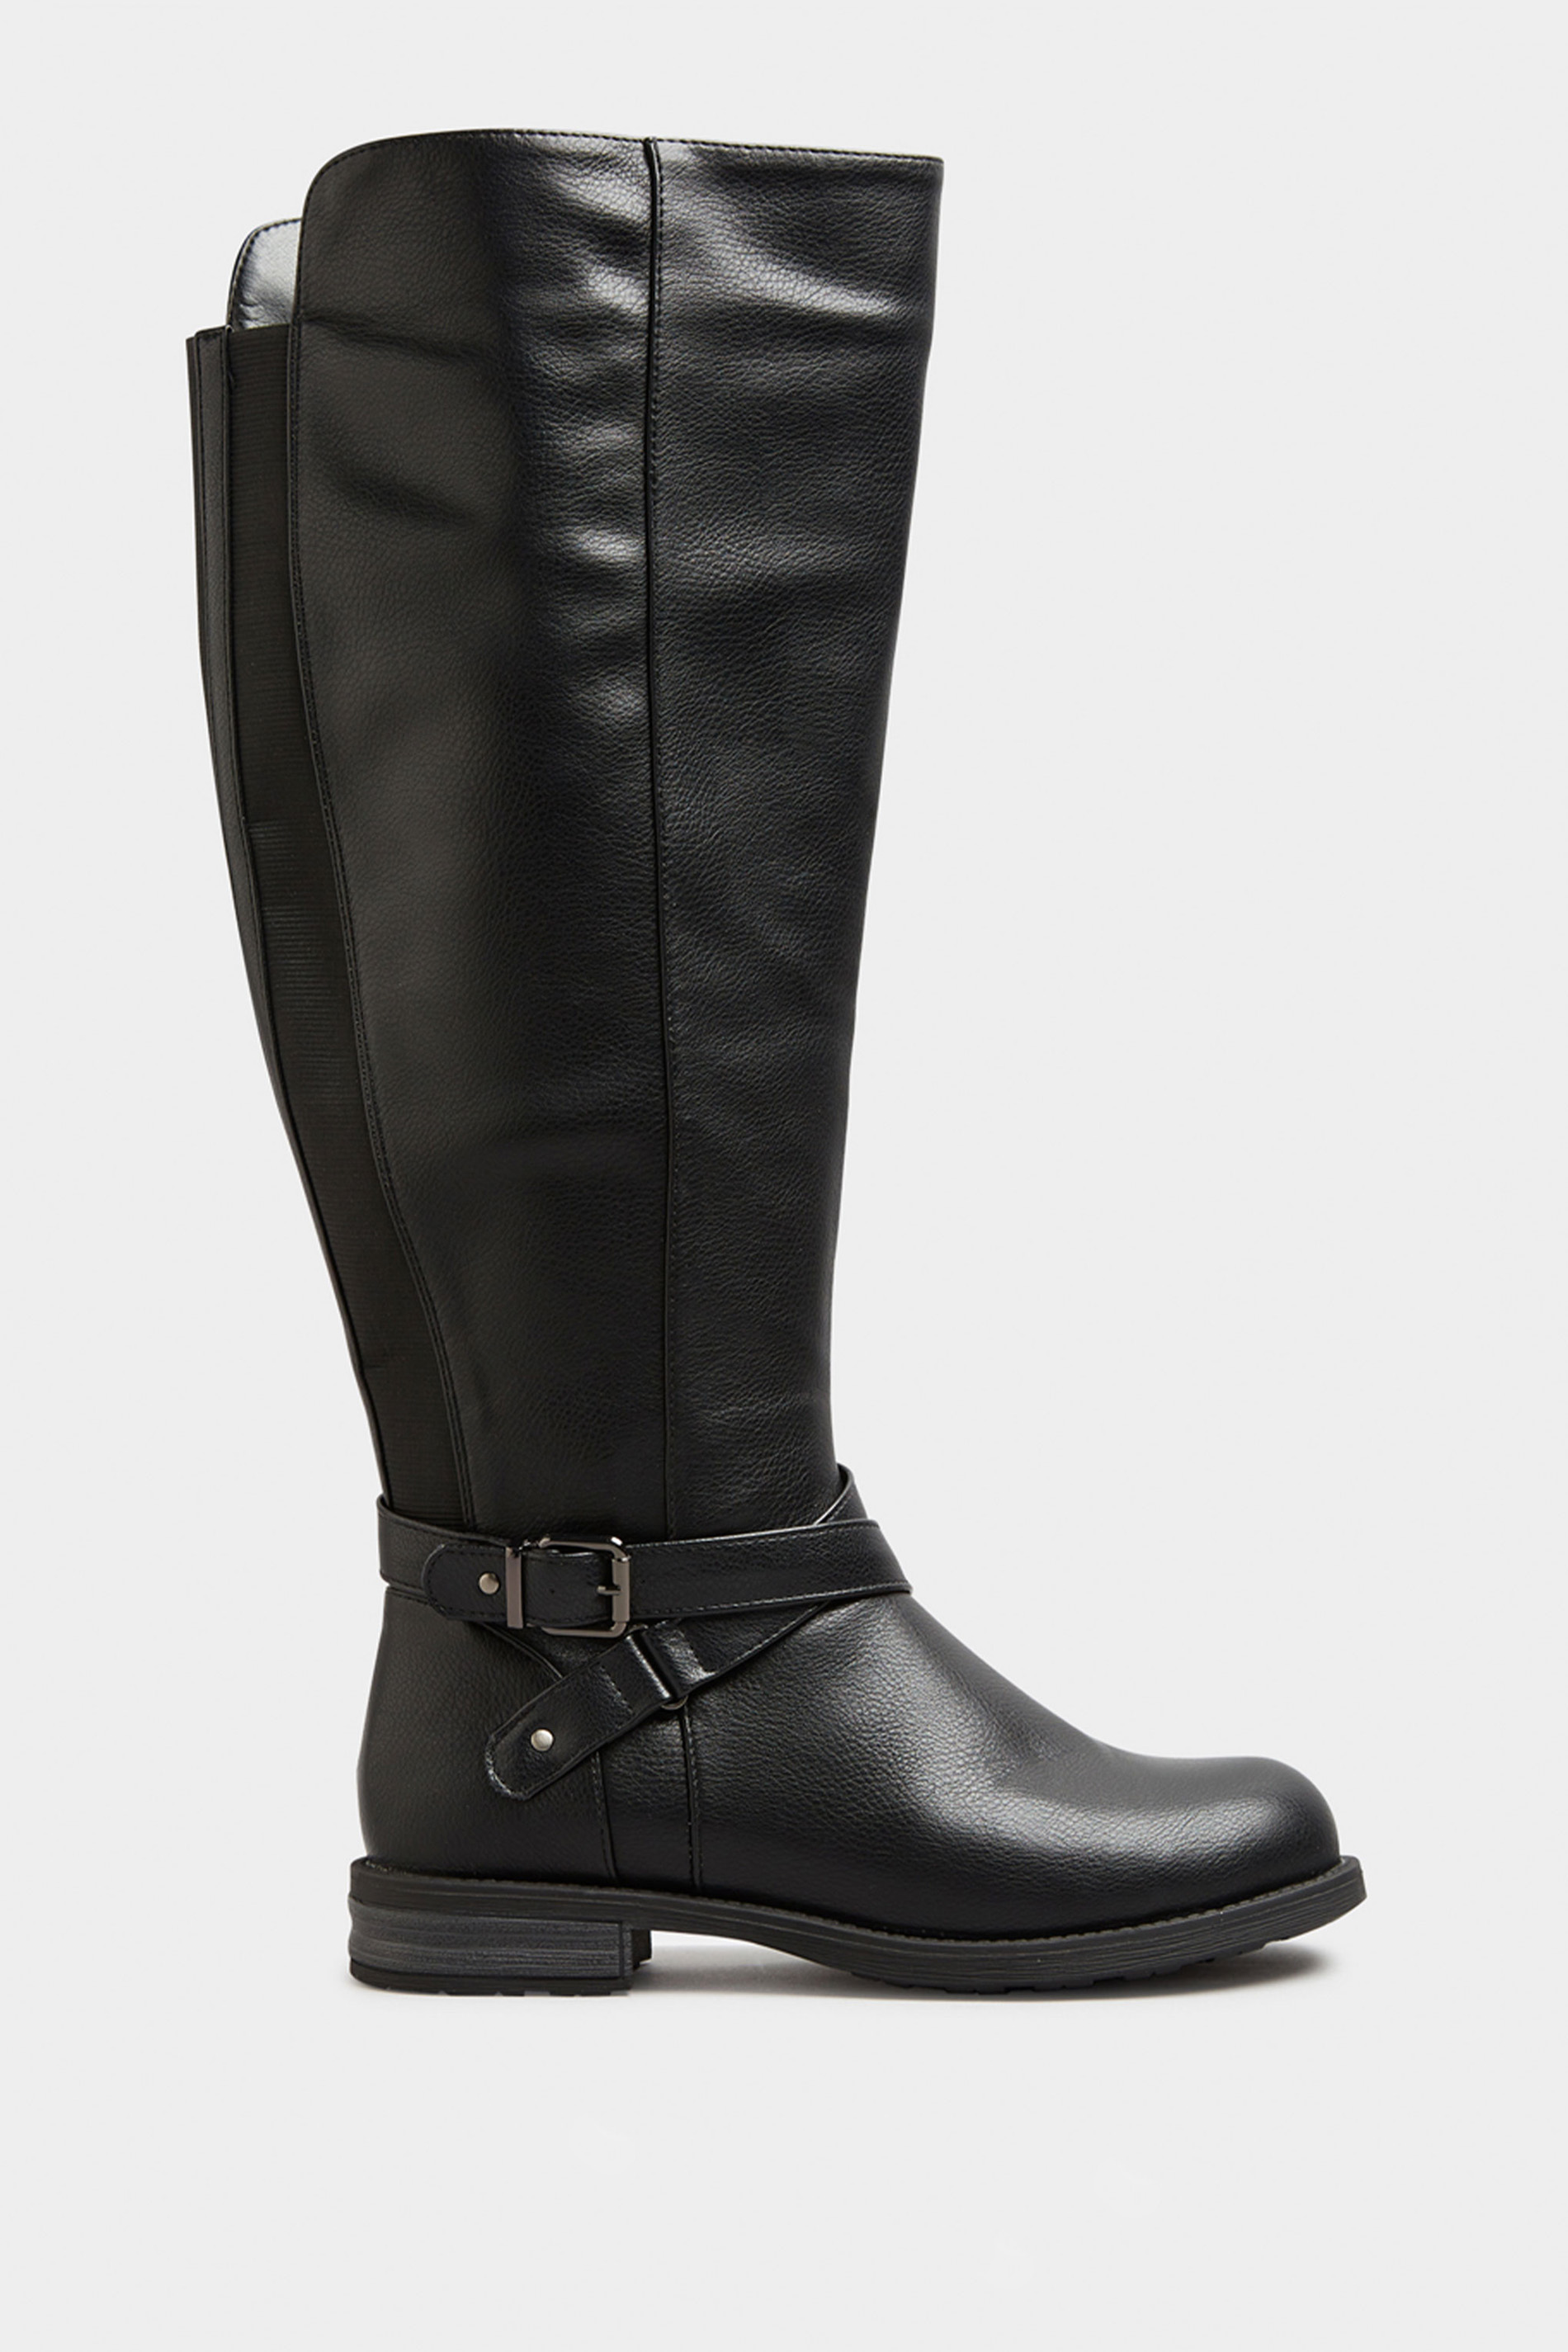 Black Faux Leather Knee High Boots In Wide E Fit & Extra Wide EE Fit | Yours Clothing 2